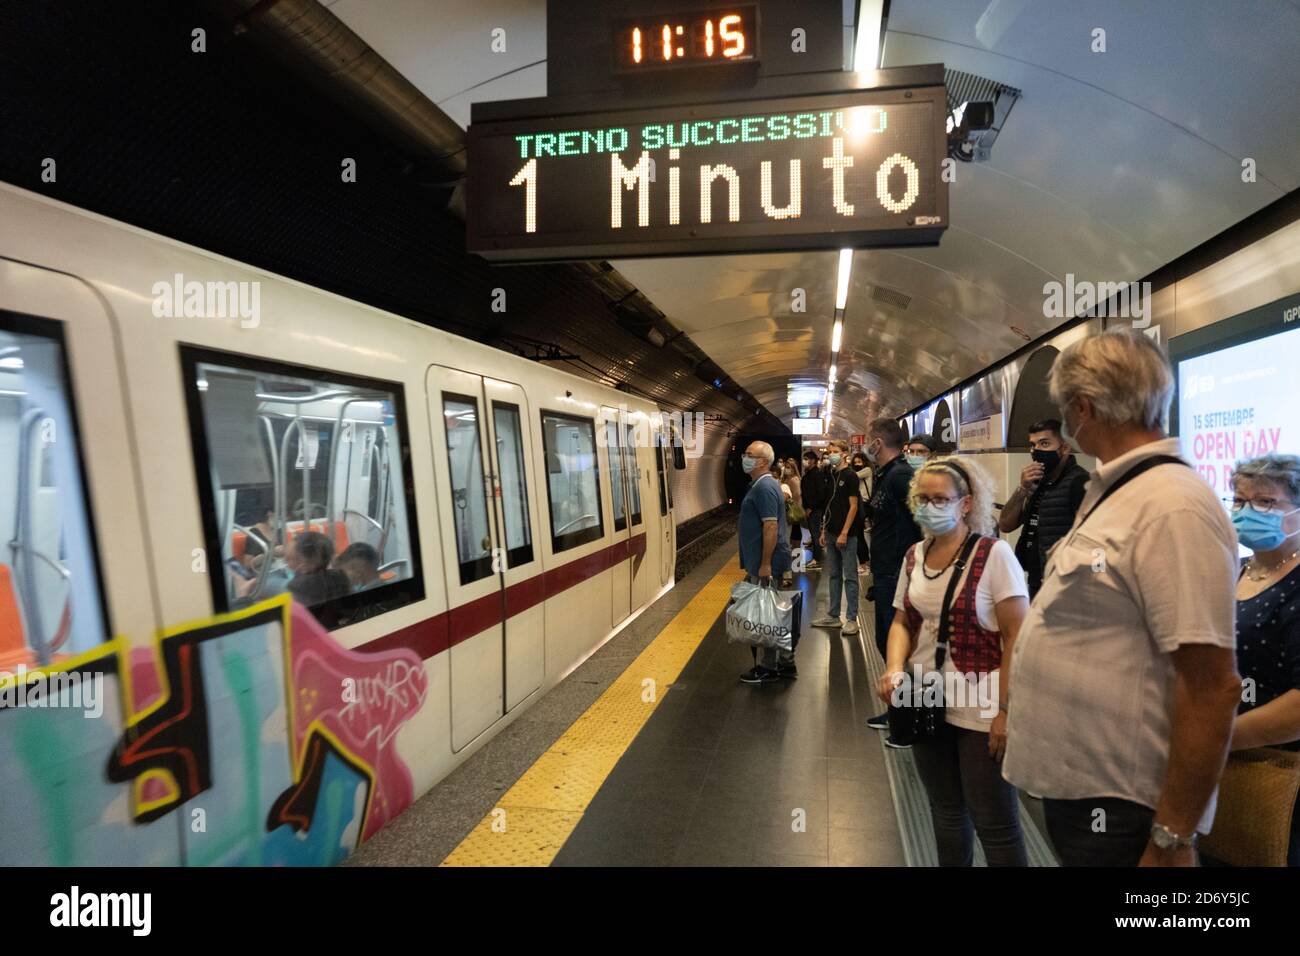 Travellers during the coronavirus pandemic waiting on a platform in the metro in Rome. From a series of travel photos in Italy. Photo date: Wednesday, Stock Photo